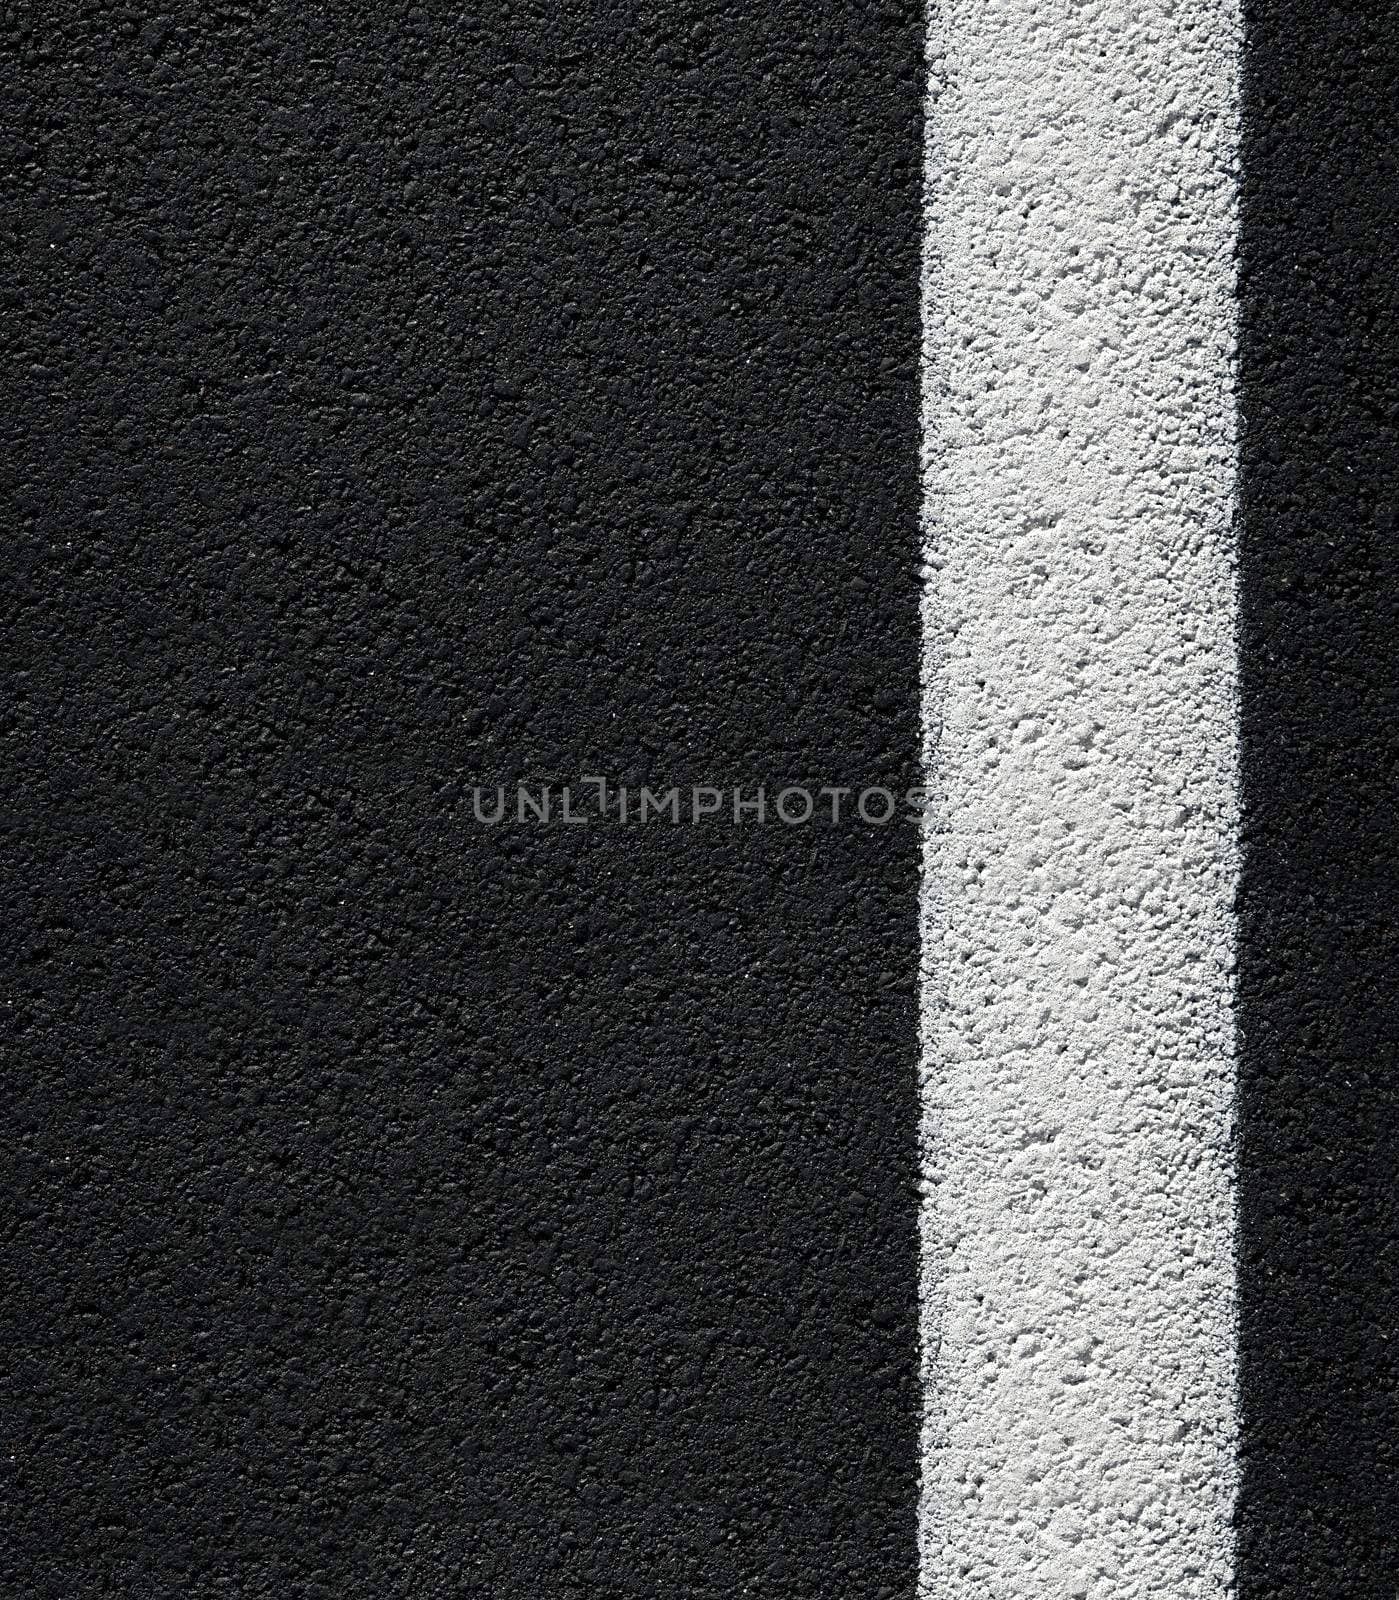 Asphalt surface with white line